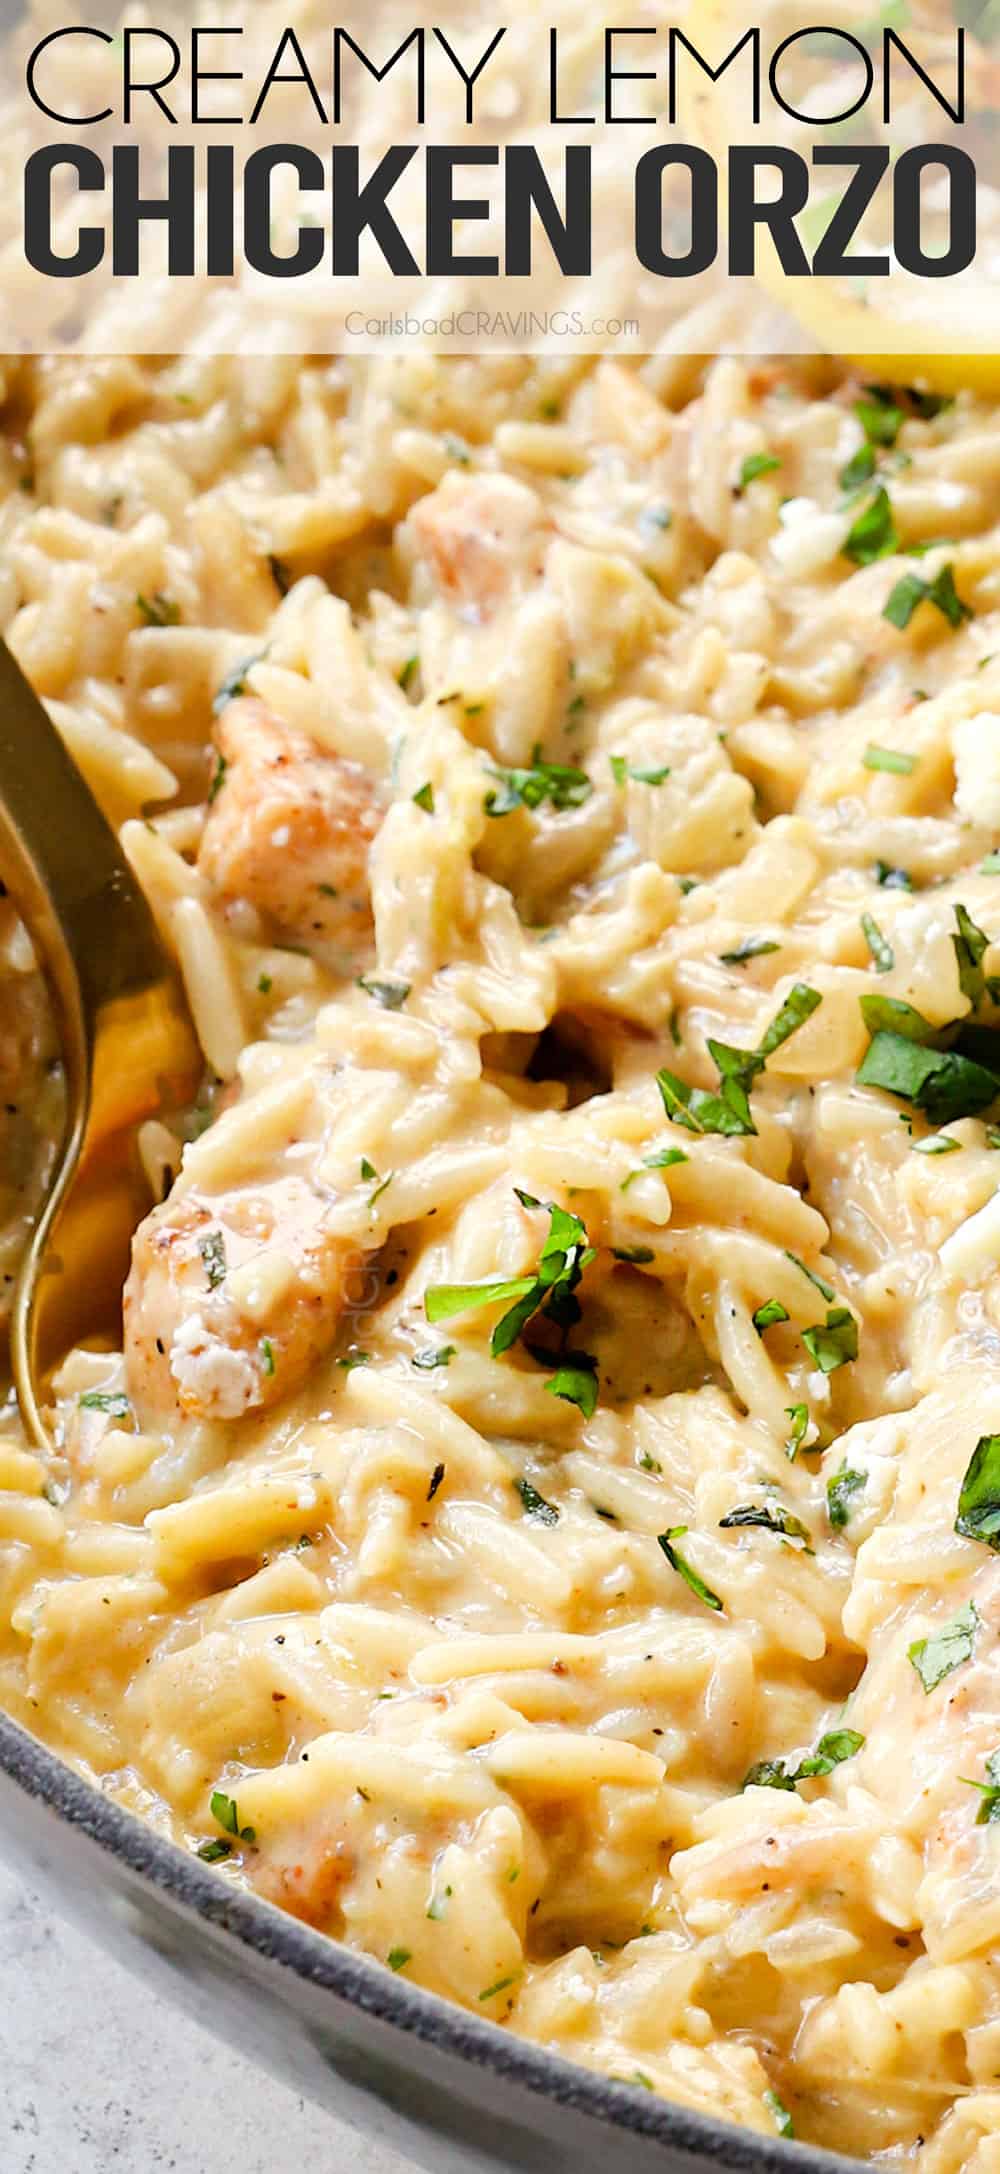 up close of lemon chicken orzo with a serving spoon showing how creamy it is